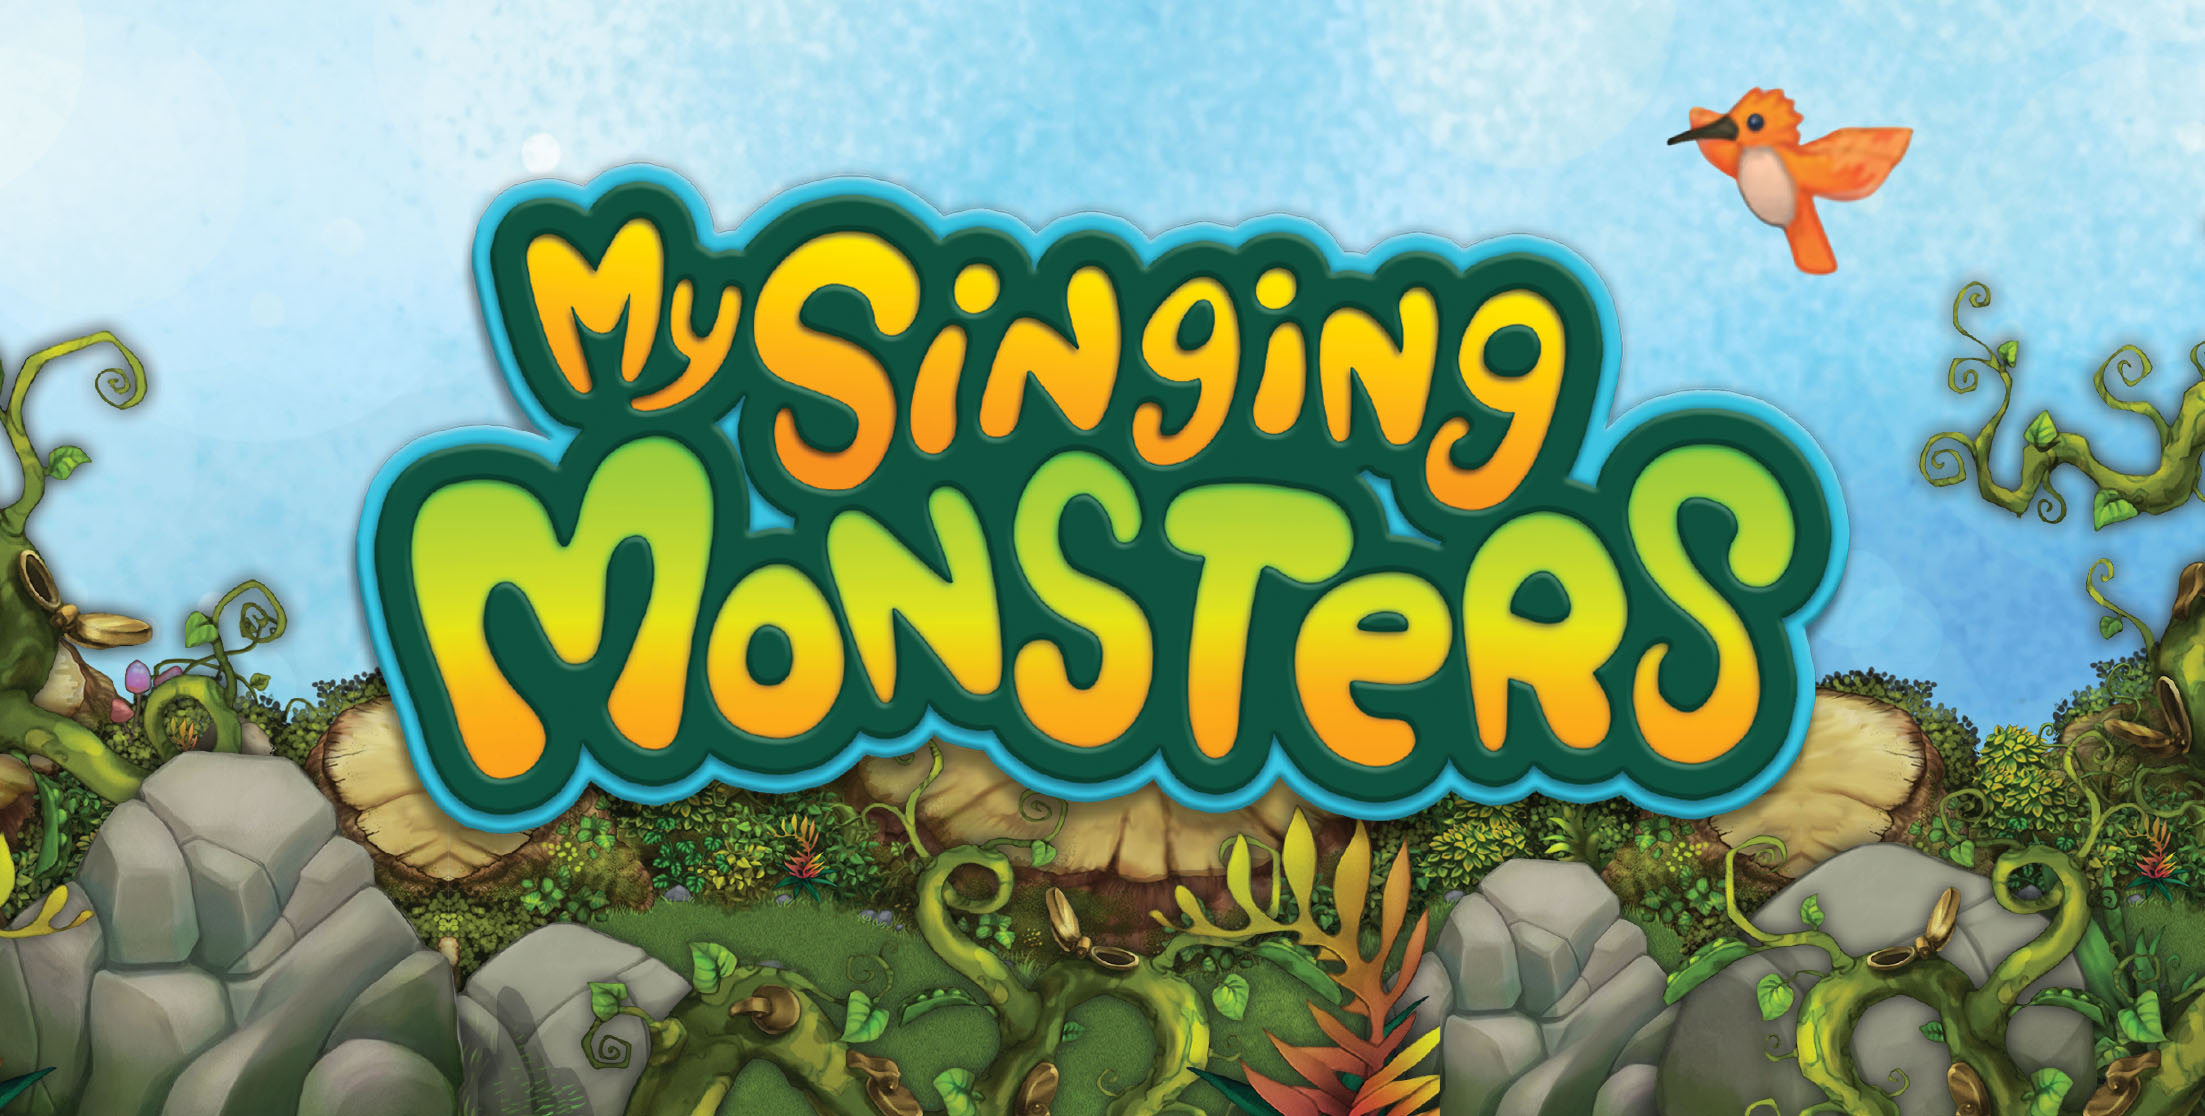 My Singing Monsters — commonwealth toy & novelty co., inc.